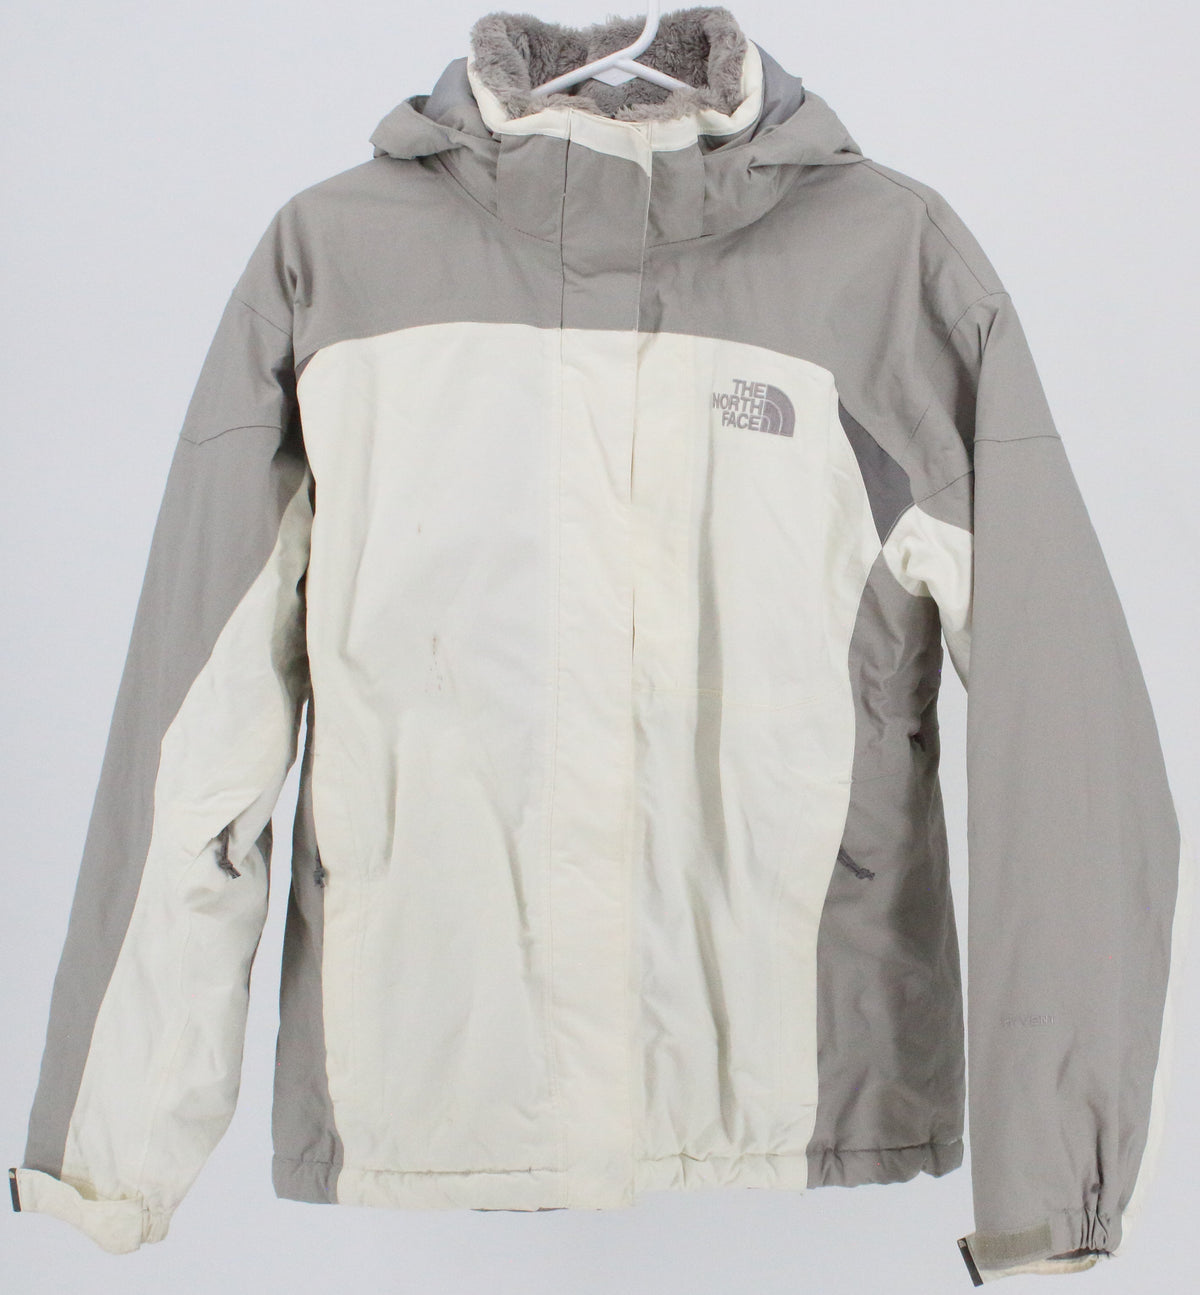 The North Face Off White and Grey Insulated Hooded Women's Jacket